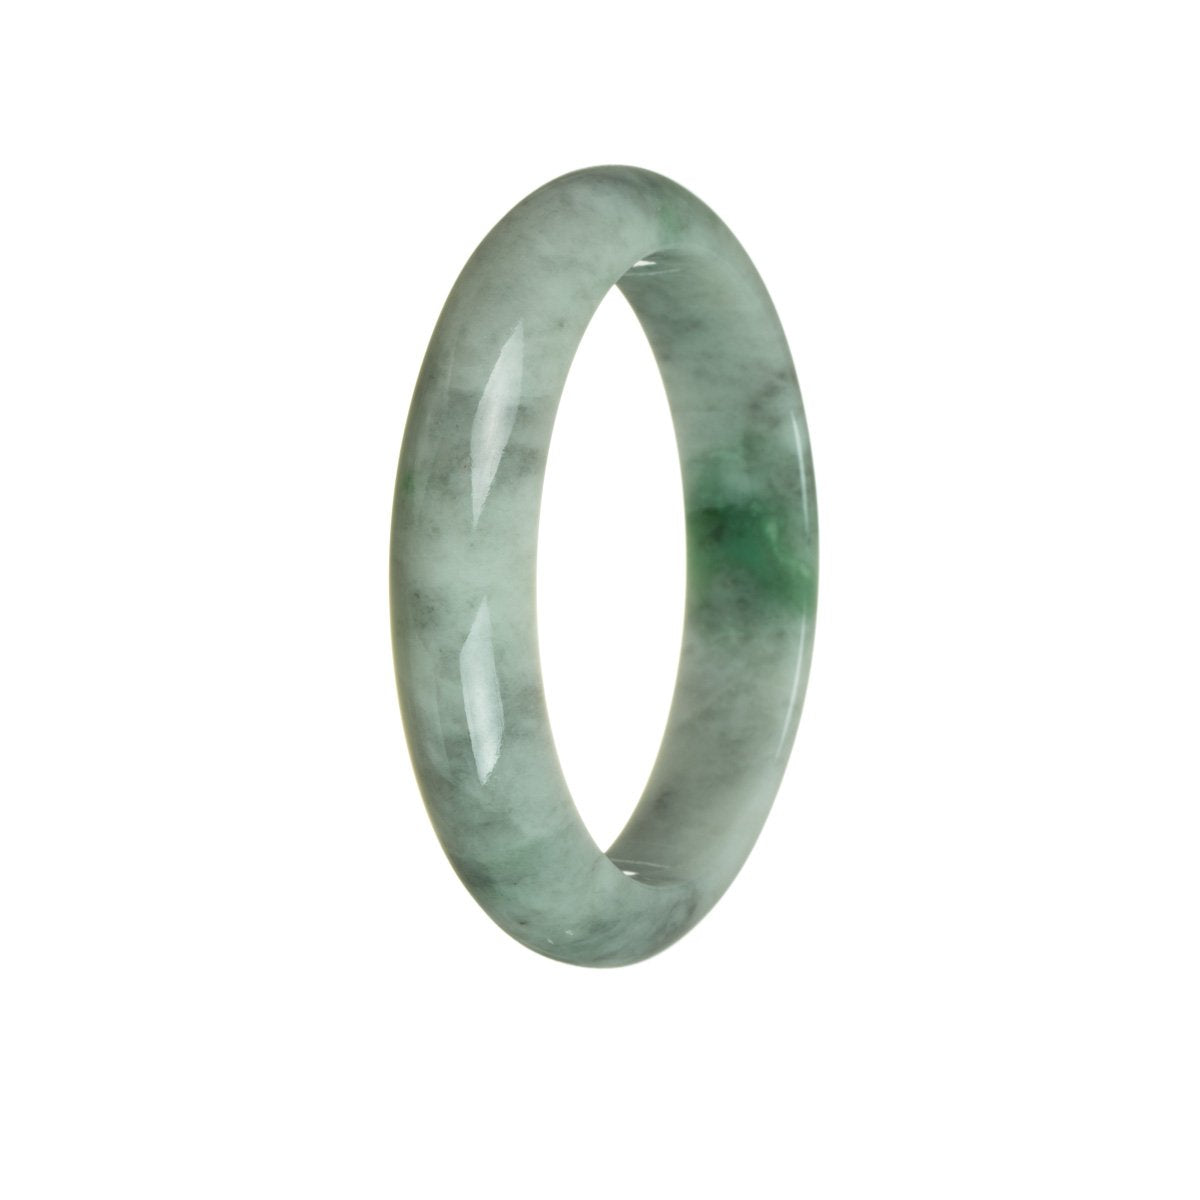 Close-up photo of a stunning, certified Grade A Bluish Green with Grey Jadeite Bracelet. The bracelet features a 58mm half moon design, exuding elegance and sophistication. Perfect for adding a touch of natural beauty to any outfit.